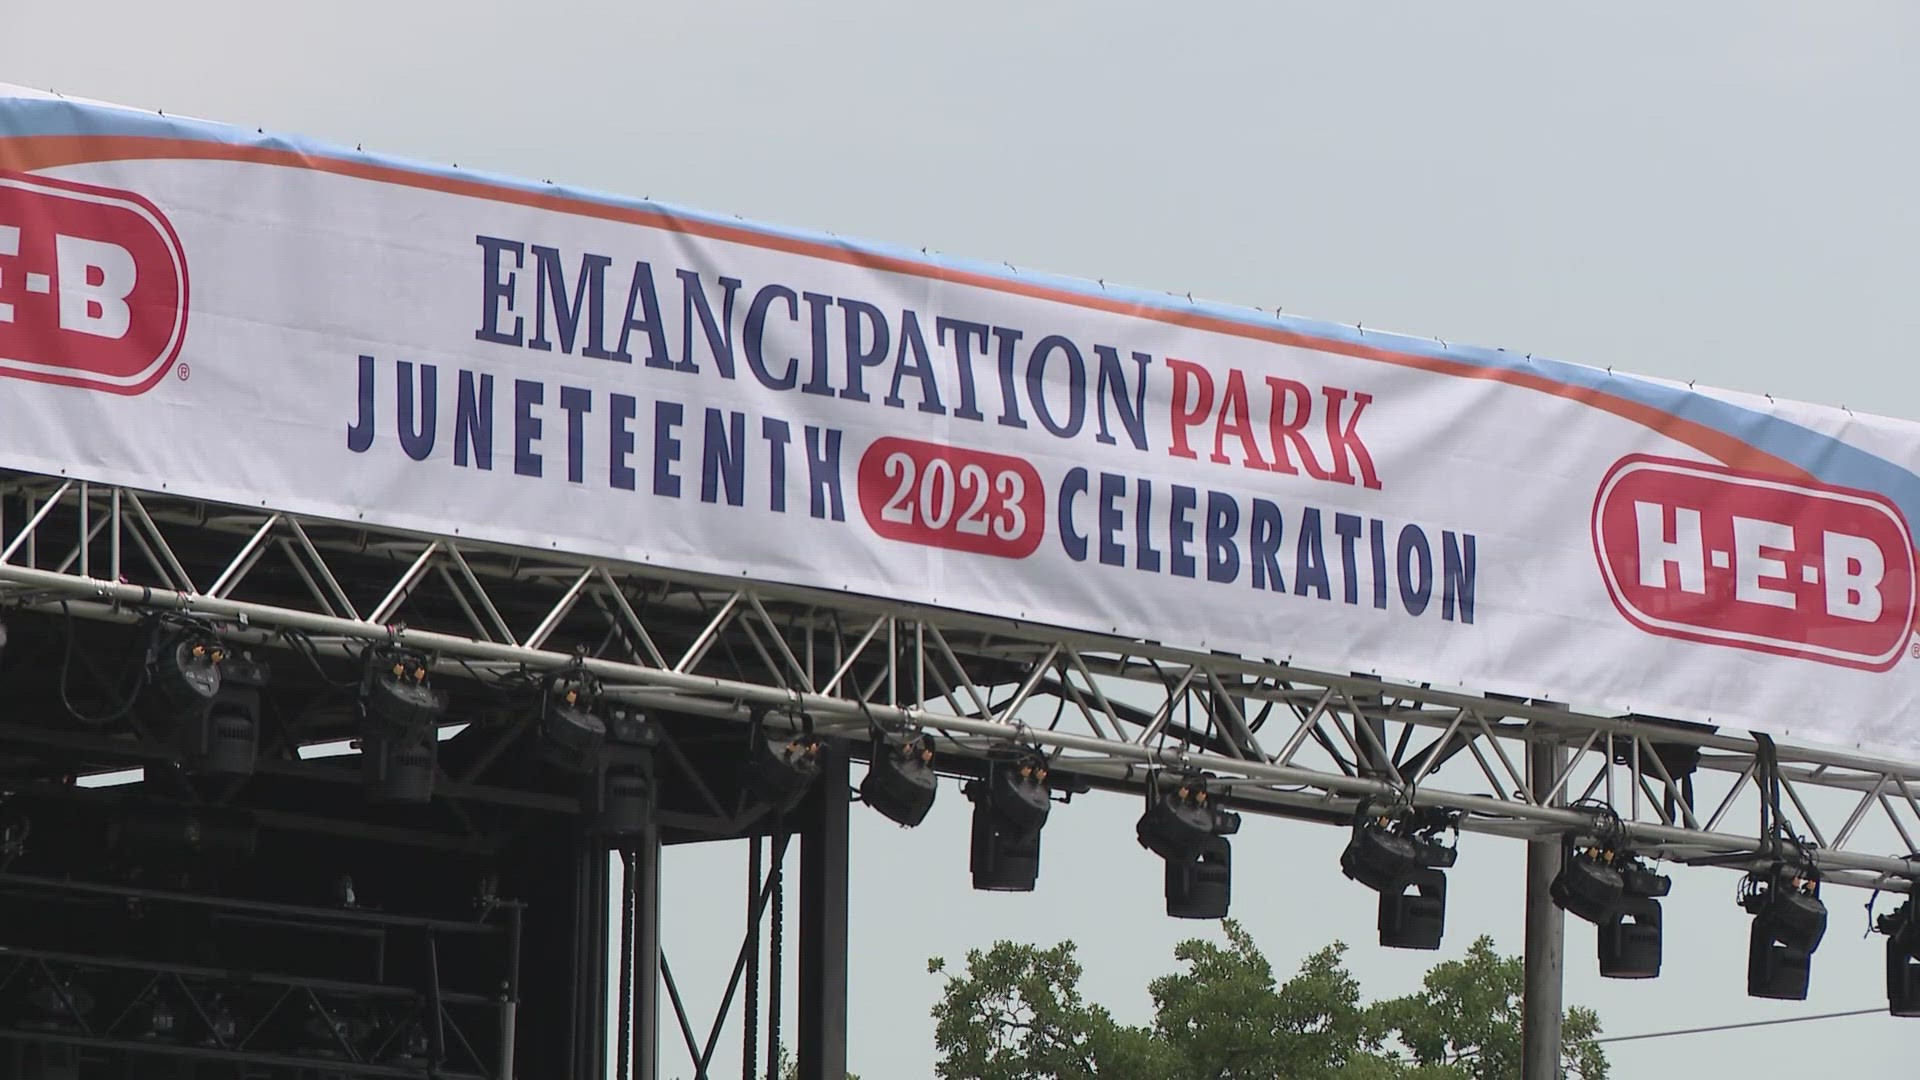 Houstonians braved the heat on Saturday to celebrate Juneteenth at Emancipation Park.